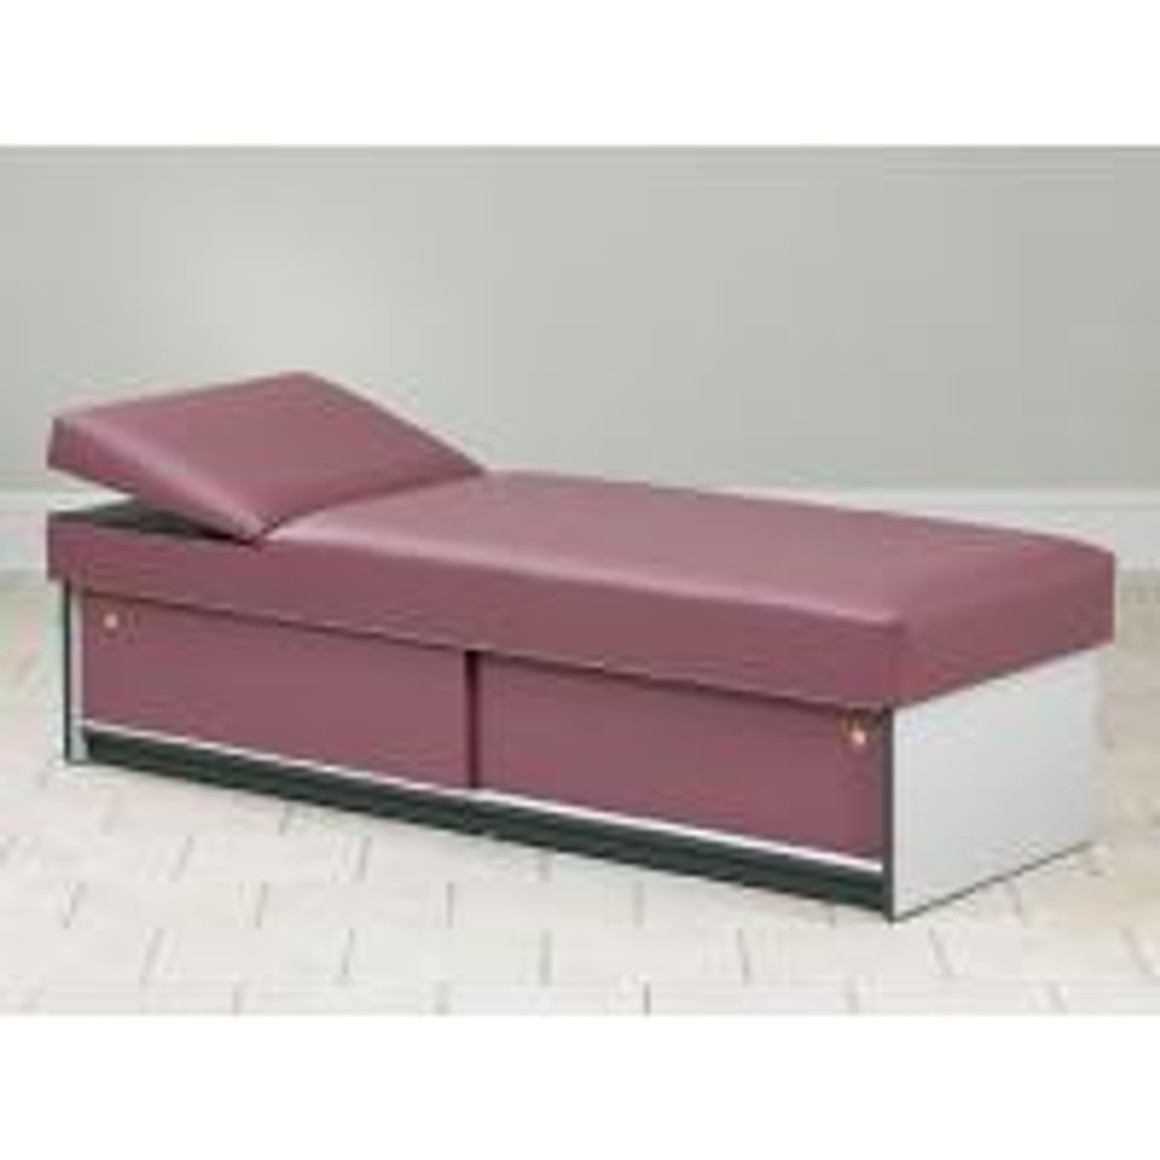 Clinton Upholstered Apron Couch with Sliding Doors, Non-Adjustable Pillow Wedge, Aubergine